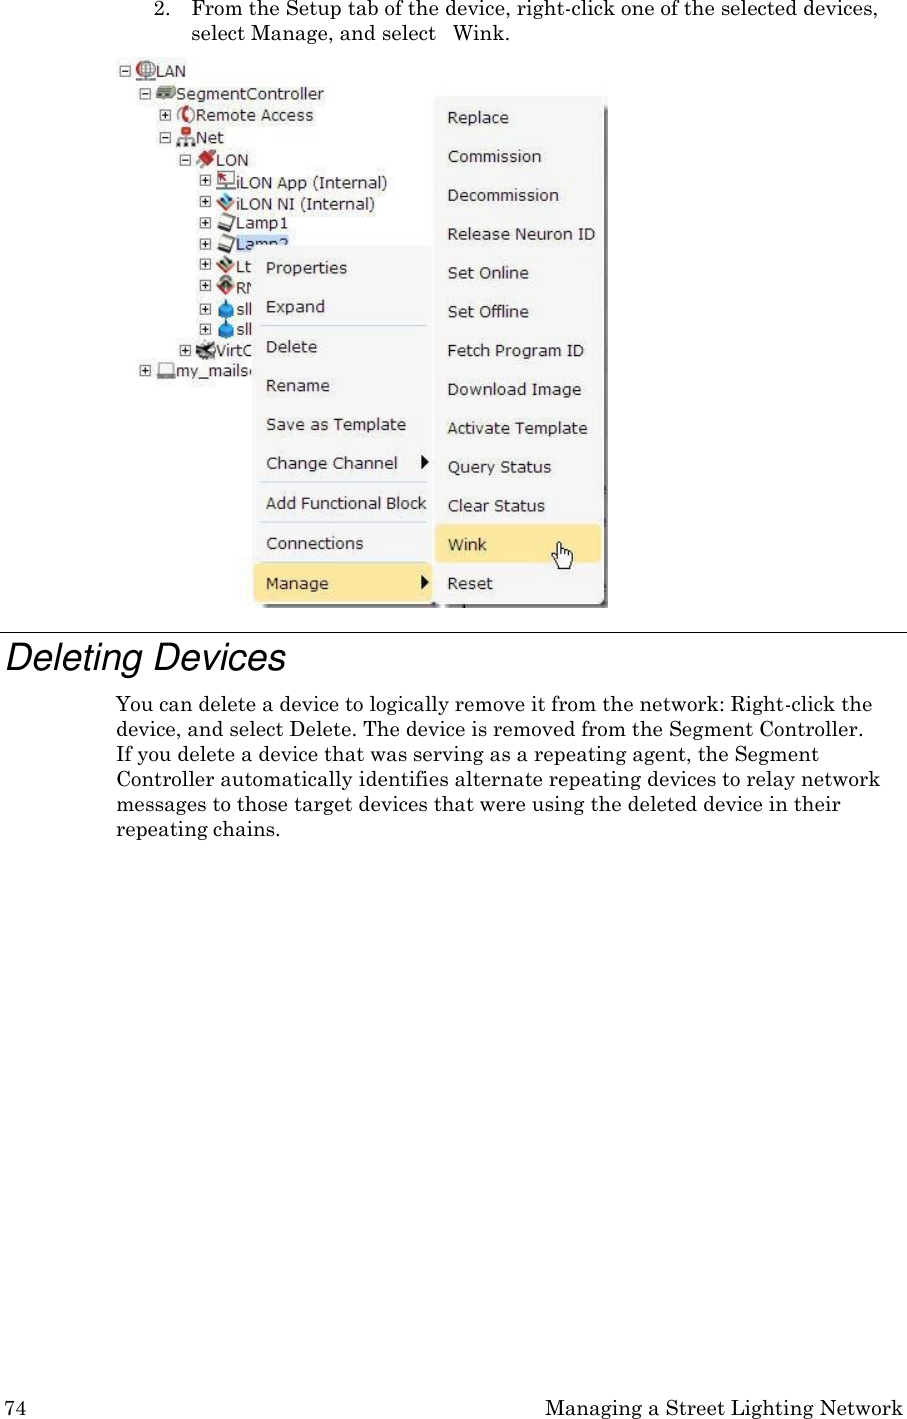 74 Managing a Street Lighting Network  2. From the Setup tab of the device, right-click one of the selected devices, select Manage, and select   Wink.  Deleting Devices You can delete a device to logically remove it from the network: Right-click the device, and select Delete. The device is removed from the Segment Controller. If you delete a device that was serving as a repeating agent, the Segment Controller automatically identifies alternate repeating devices to relay network messages to those target devices that were using the deleted device in their repeating chains. 